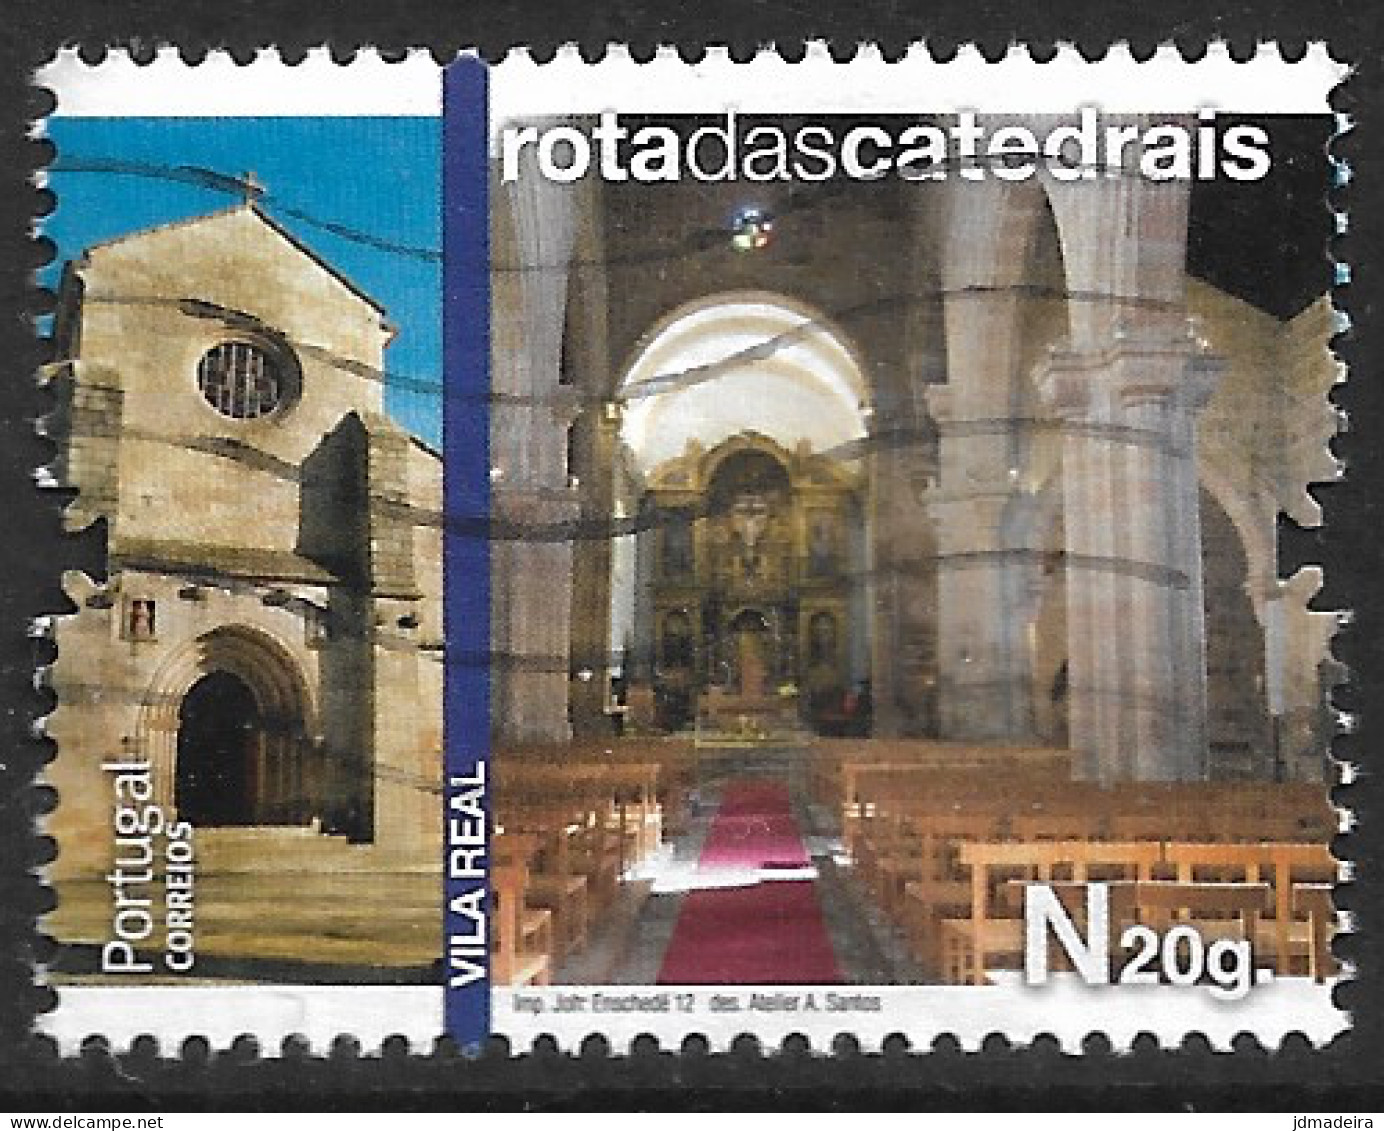 Portugal – 2012 Cathedrals 0,42 Used Stamp - Oblitérés